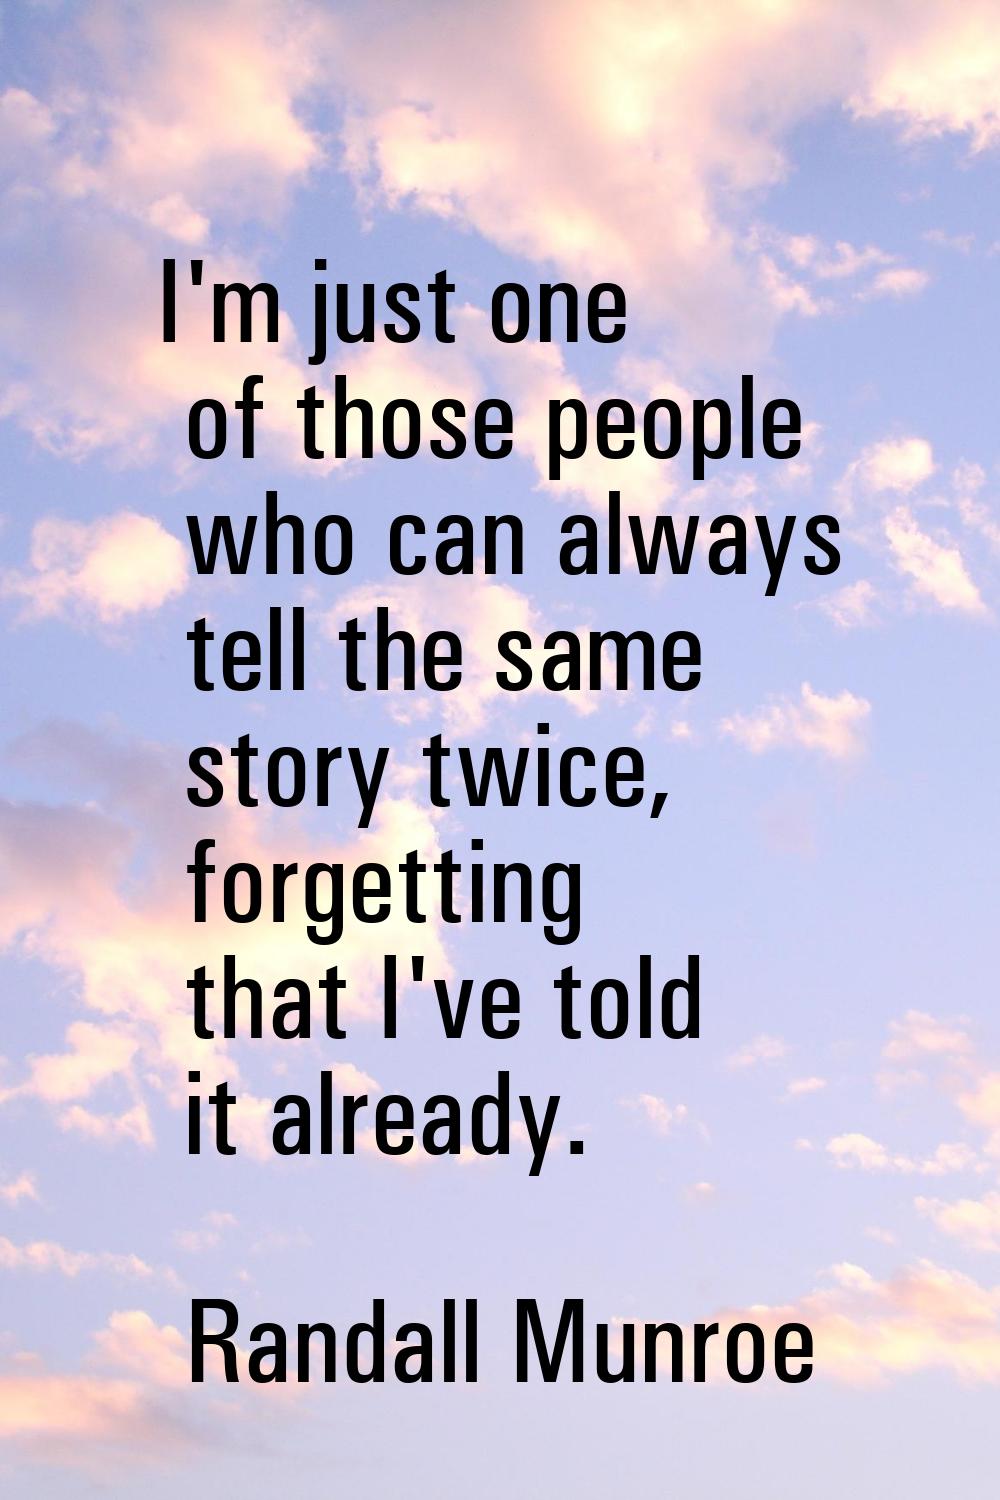 I'm just one of those people who can always tell the same story twice, forgetting that I've told it